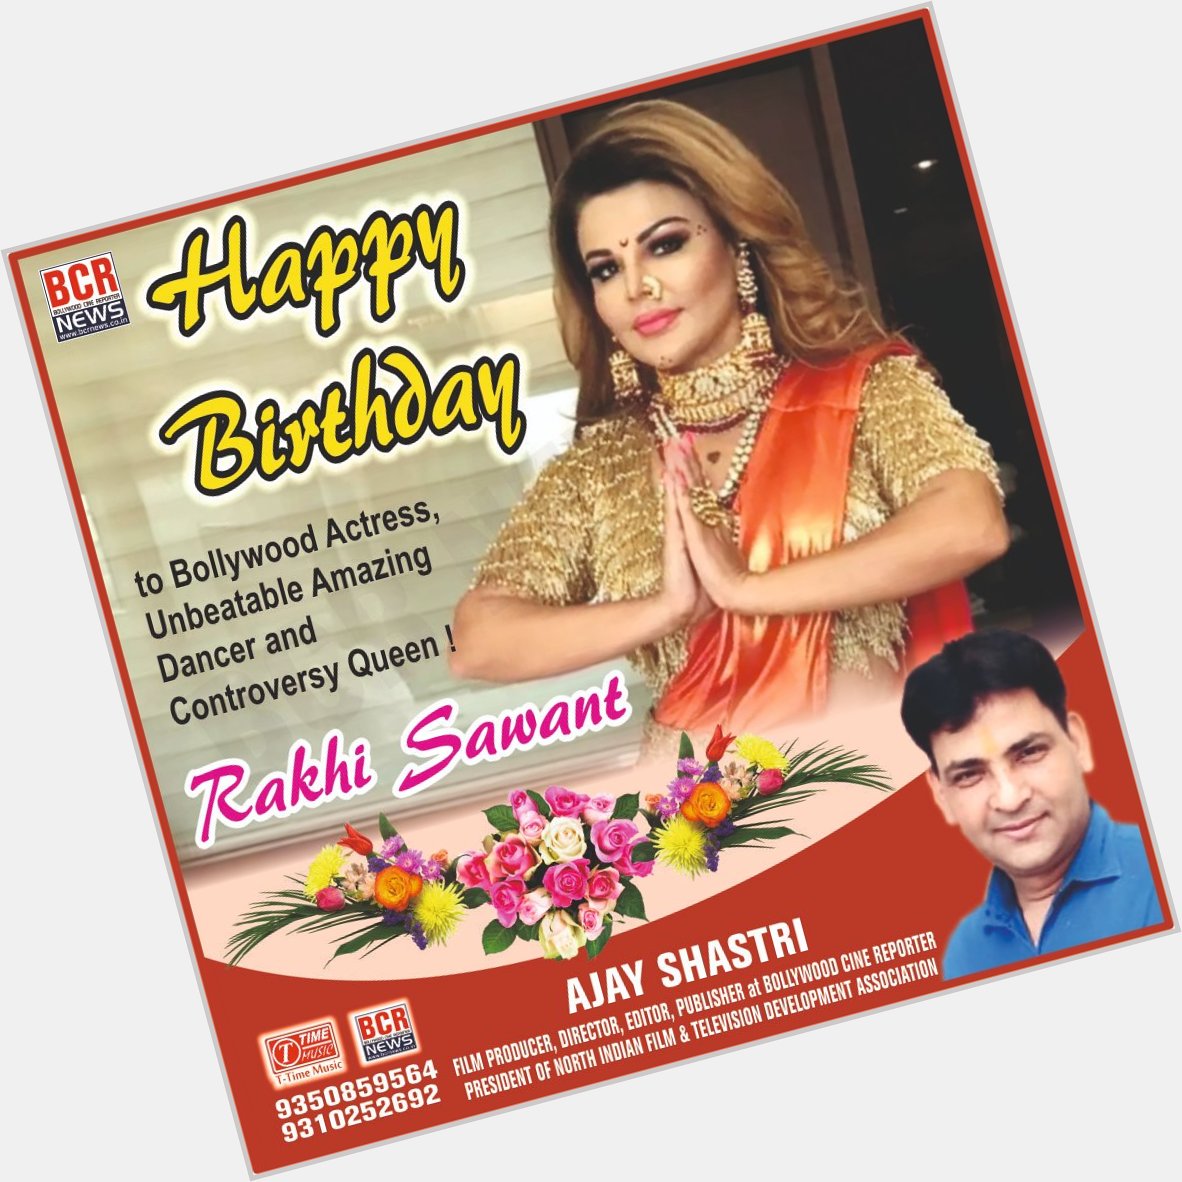 Happy Birthday to Bollywood Actress, Unbeatable Amazing Dancer and Controversy Queen Rakhi Sawant: Ajay Shastri 